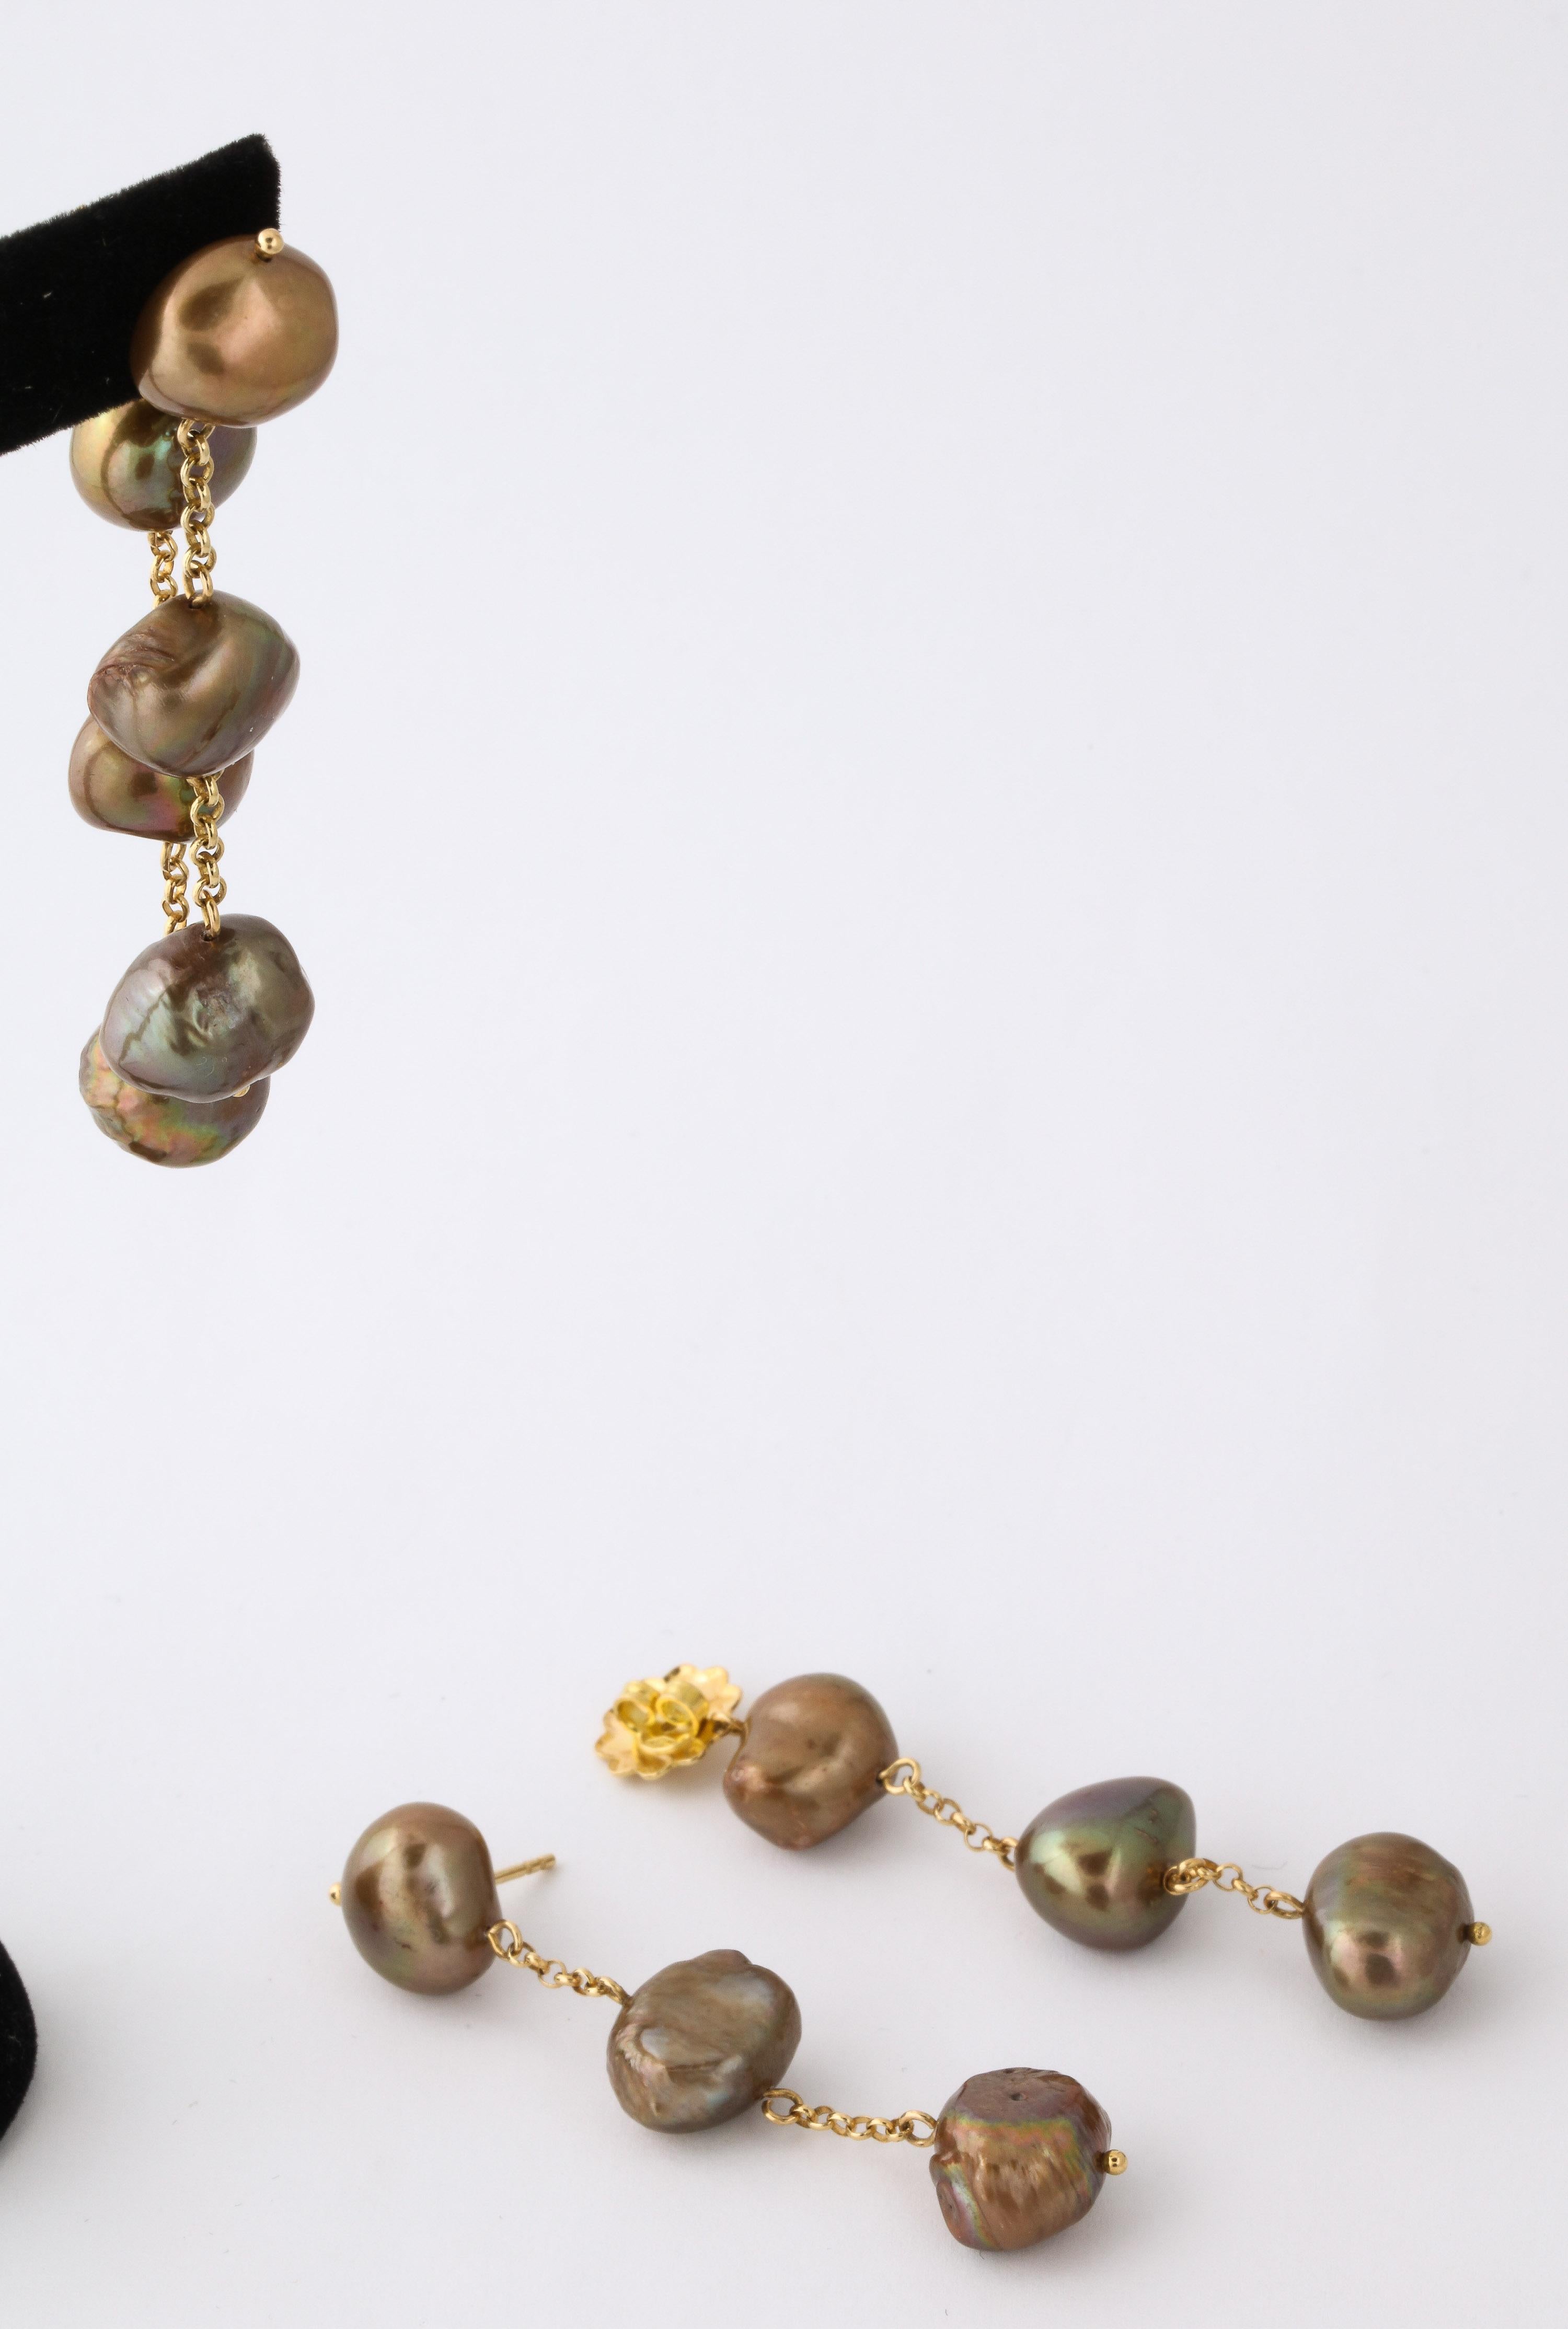 Chocolate Brown Baroque Pearl Dangling Earrings on 18 Karat Yellow Gold Chain For Sale 1